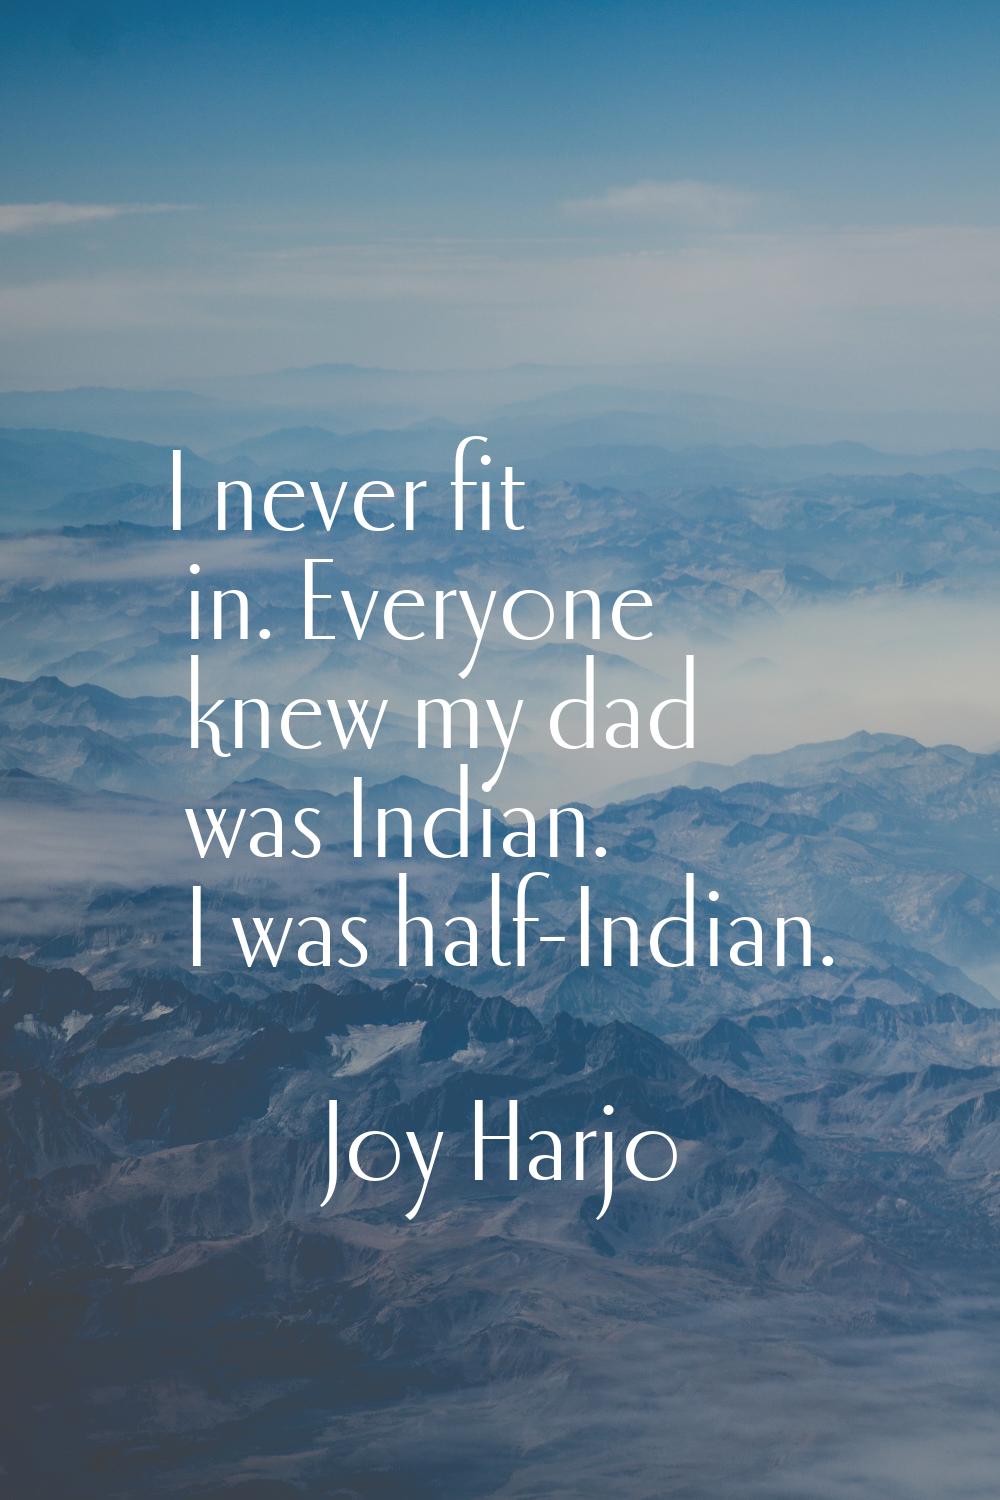 I never fit in. Everyone knew my dad was Indian. I was half-Indian.